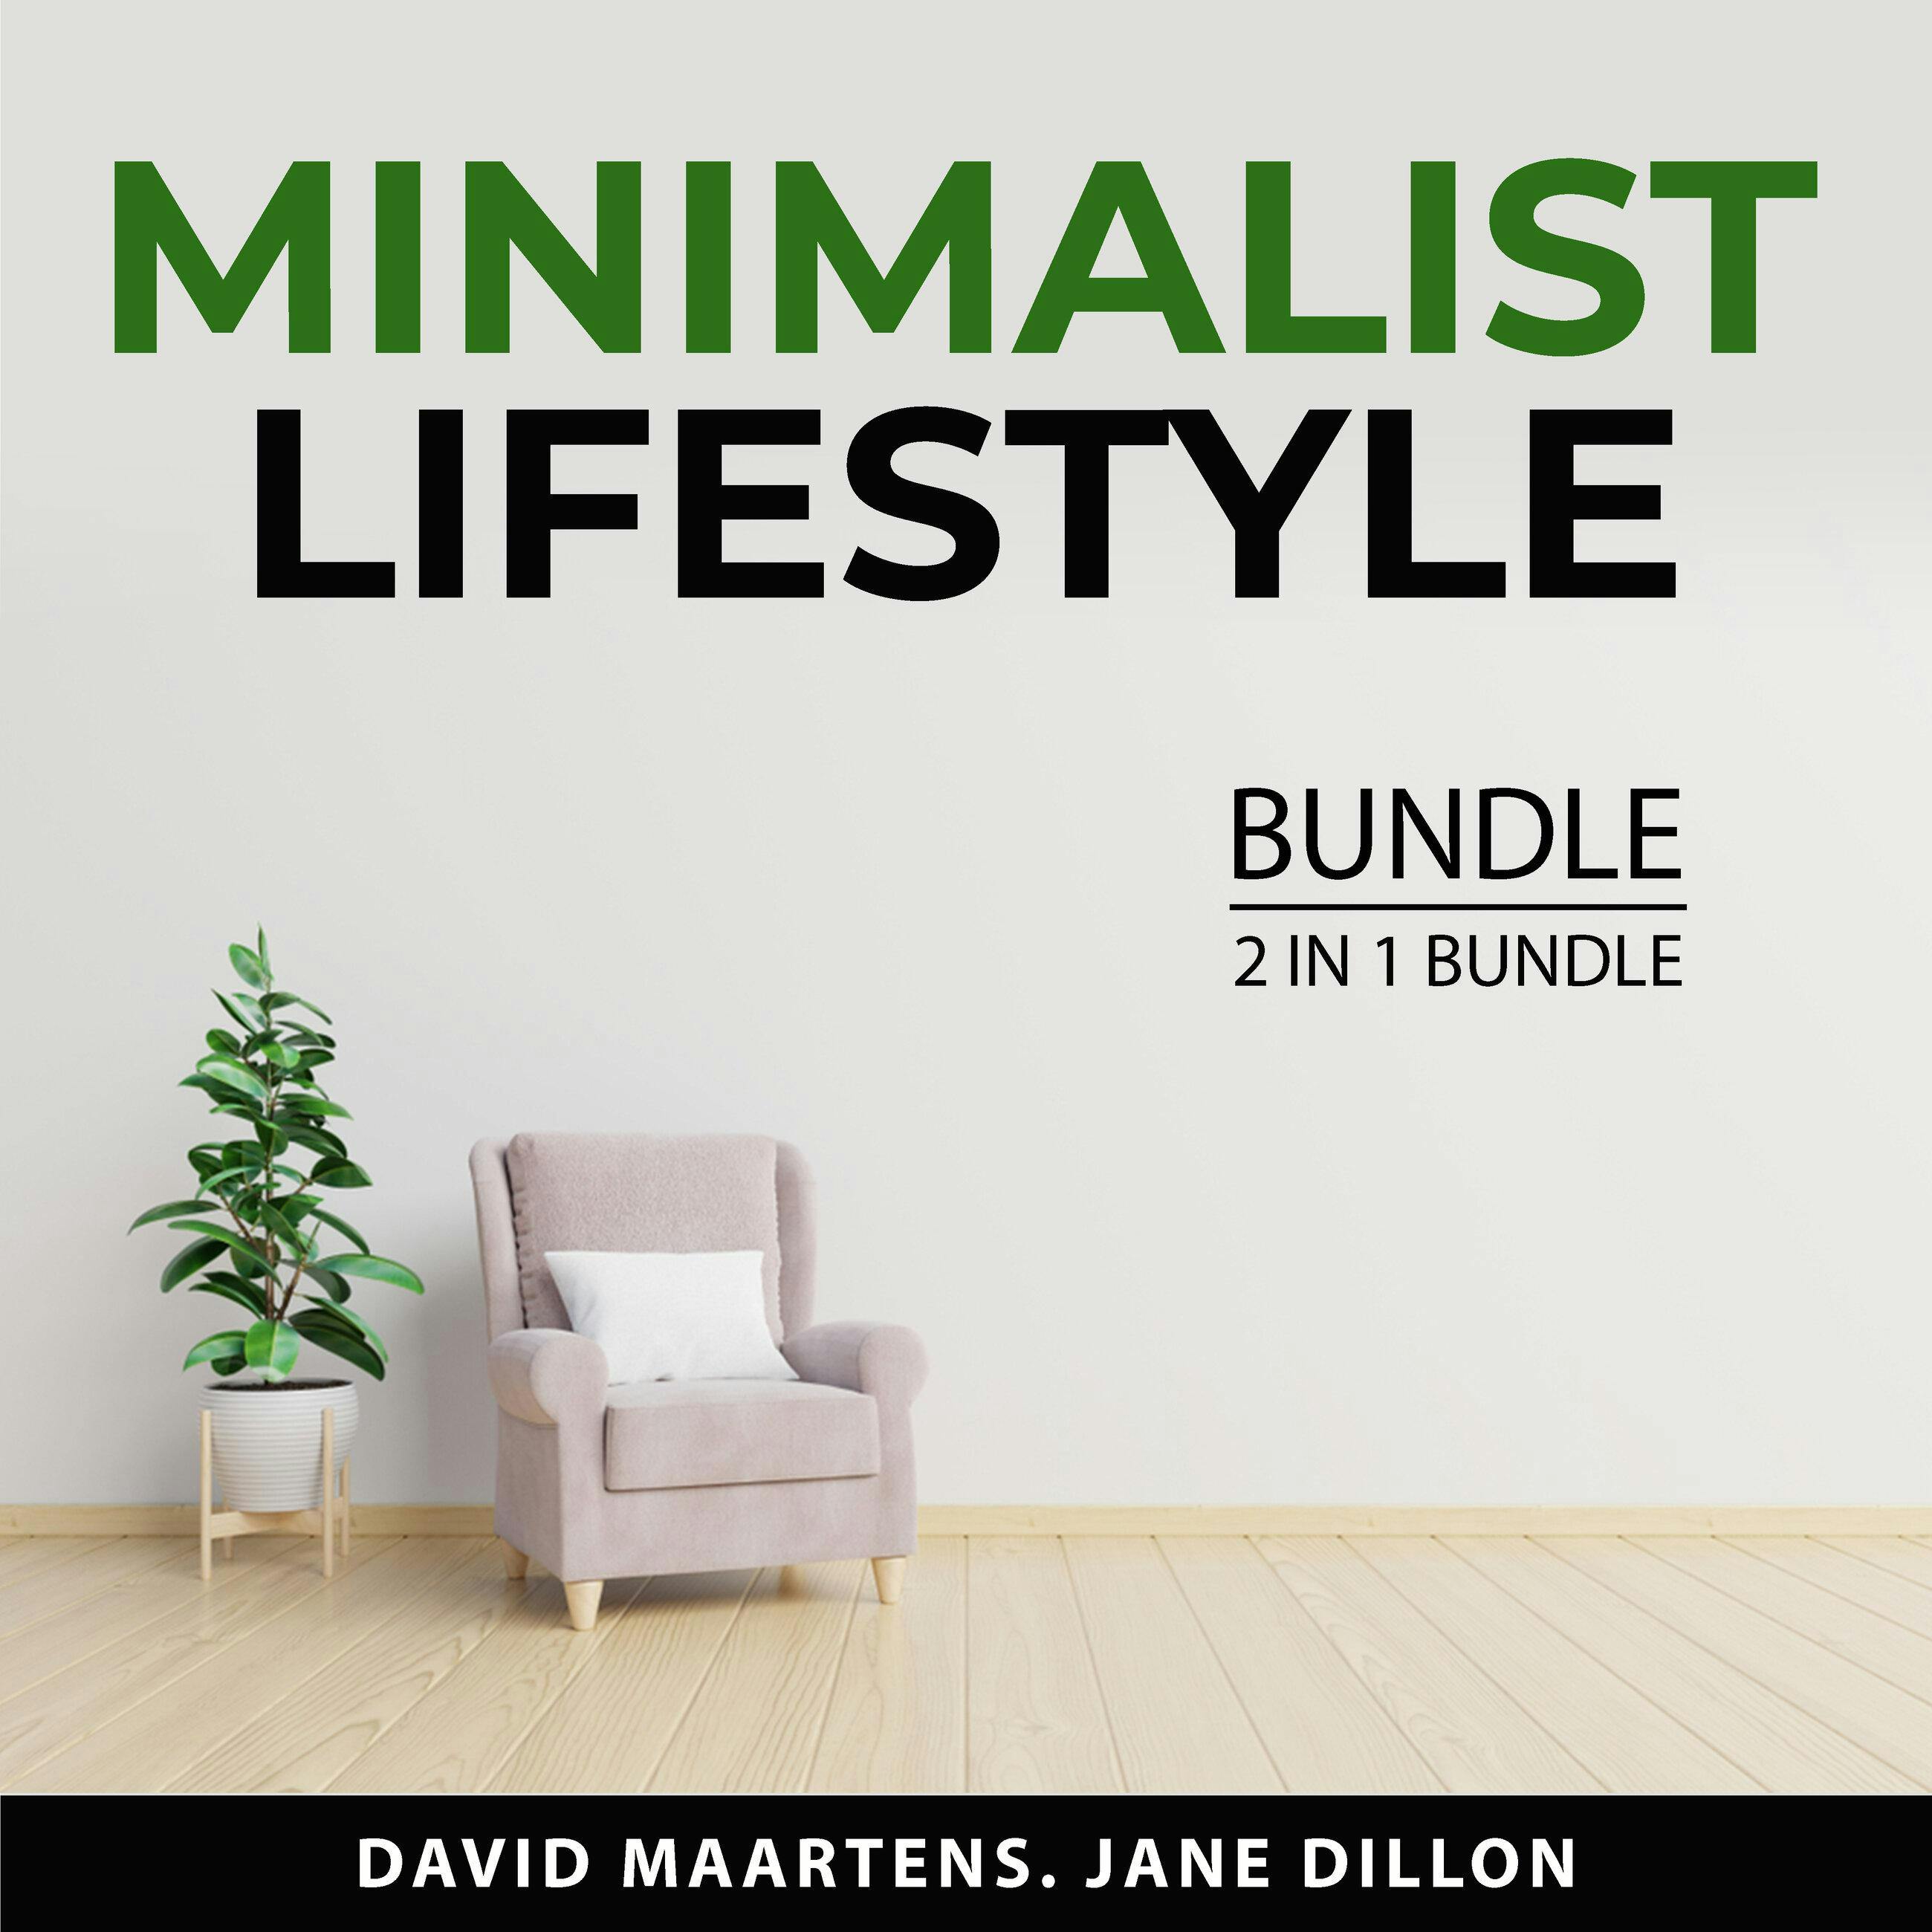 Minimalist Lifestyle Bundle, 2 in 1 Bundle: Art of Minimalism and Declutter and Organize Your Home - David Maartens, Jane Dillon